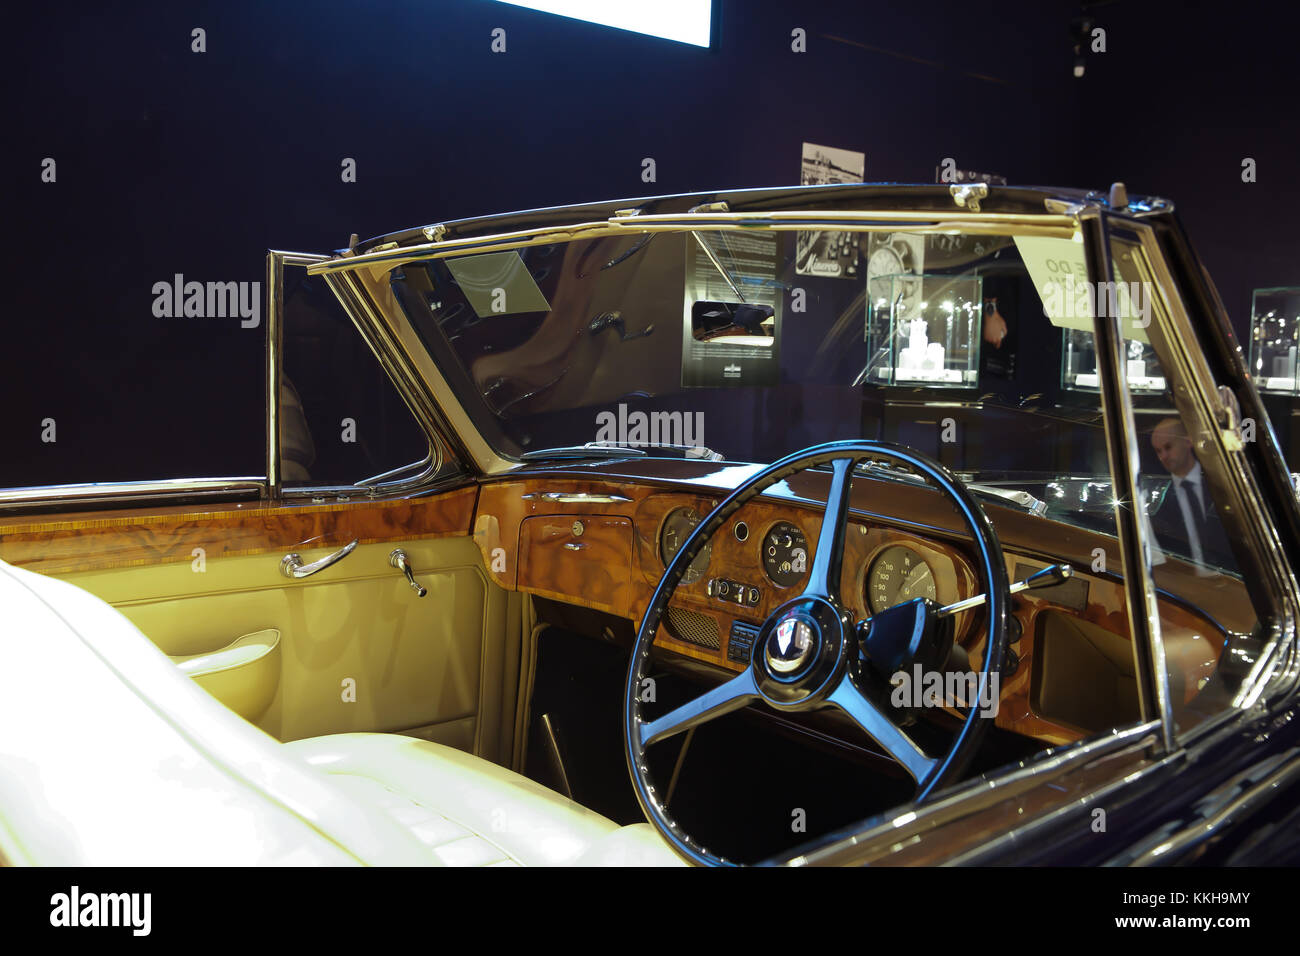 London, UK,1st December 2017, Top Celebrity cars on display at Bonhams in London. Cars include: A 1959 Rolls-Royce Silver Cloud (£600,000-800,000) It originally belonged to Pete Murray OBE, and the car was used as the wedding car for the marriage of Madonna and Guy Ritchie at Skibo Castle in 2000 Credit: Keith Larby/Alamy Live News Stock Photo